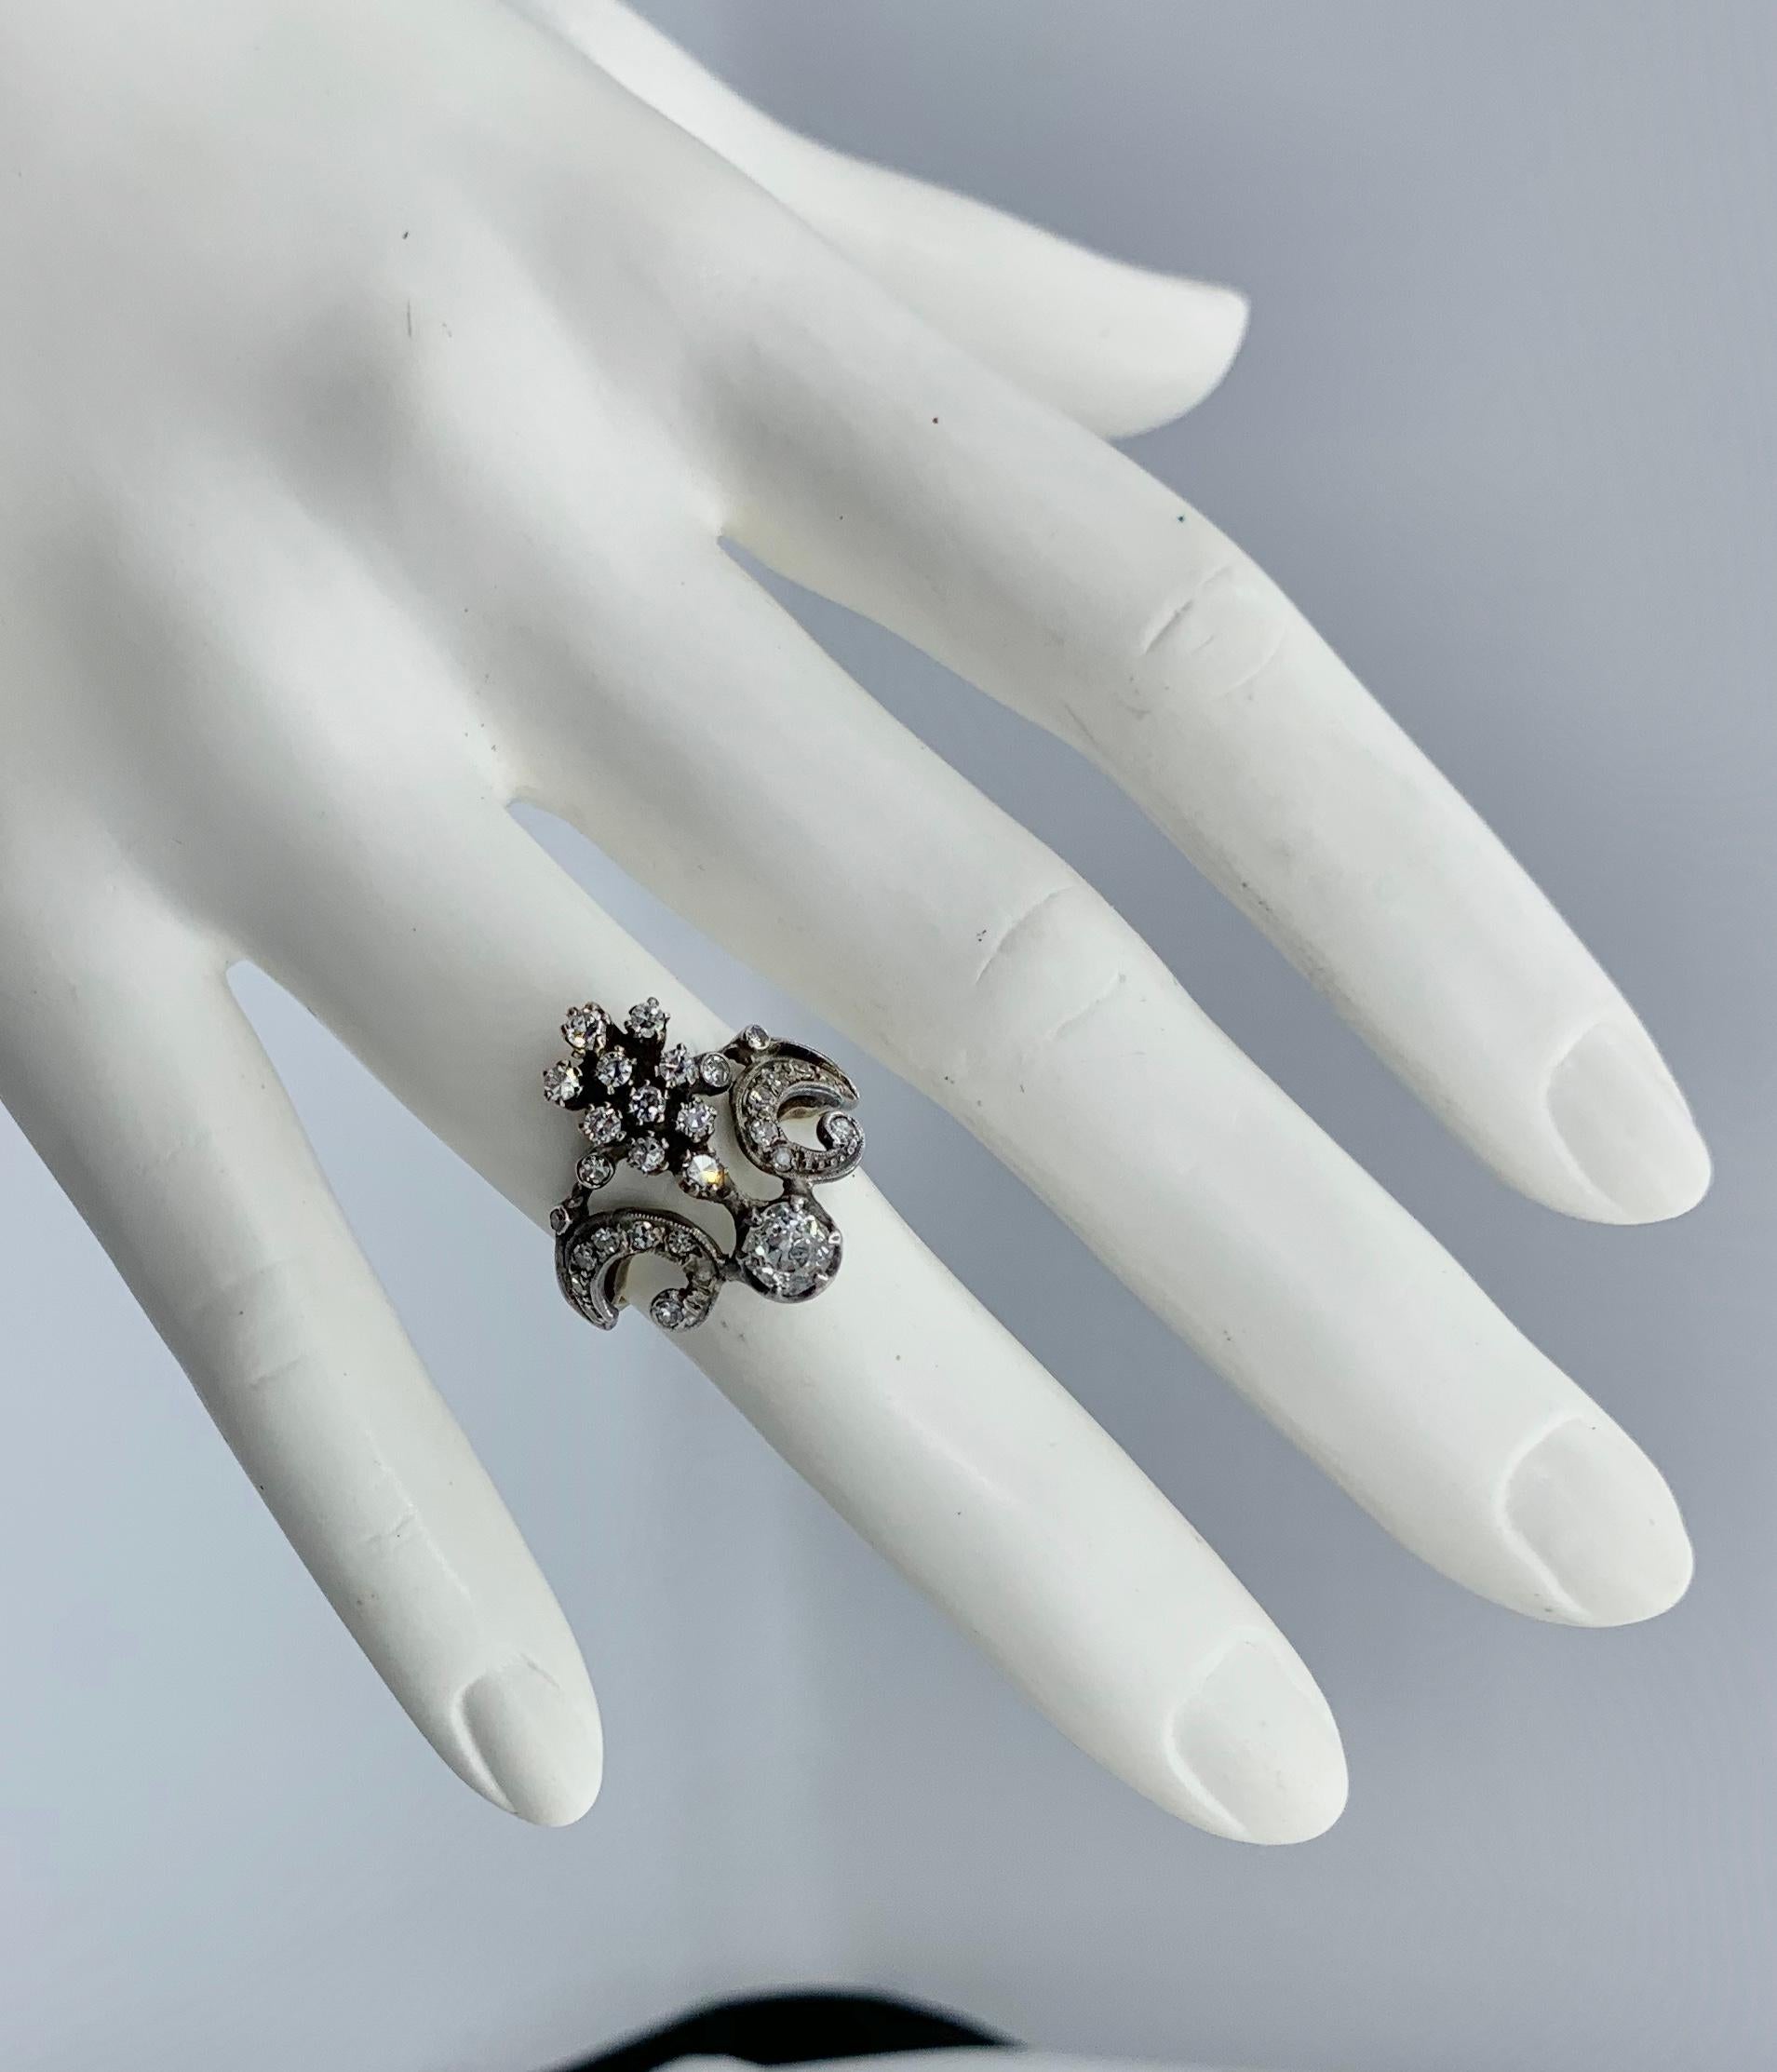 This is an extraordinary antique Belle Epoque Old Mine Cut Diamond Ring in a stunning and very rare Crown or Tiara motif of great beauty.   The Old Mine Cut Diamonds are set in Silver atop 18 Karat Gold as was the custom of the period in order to